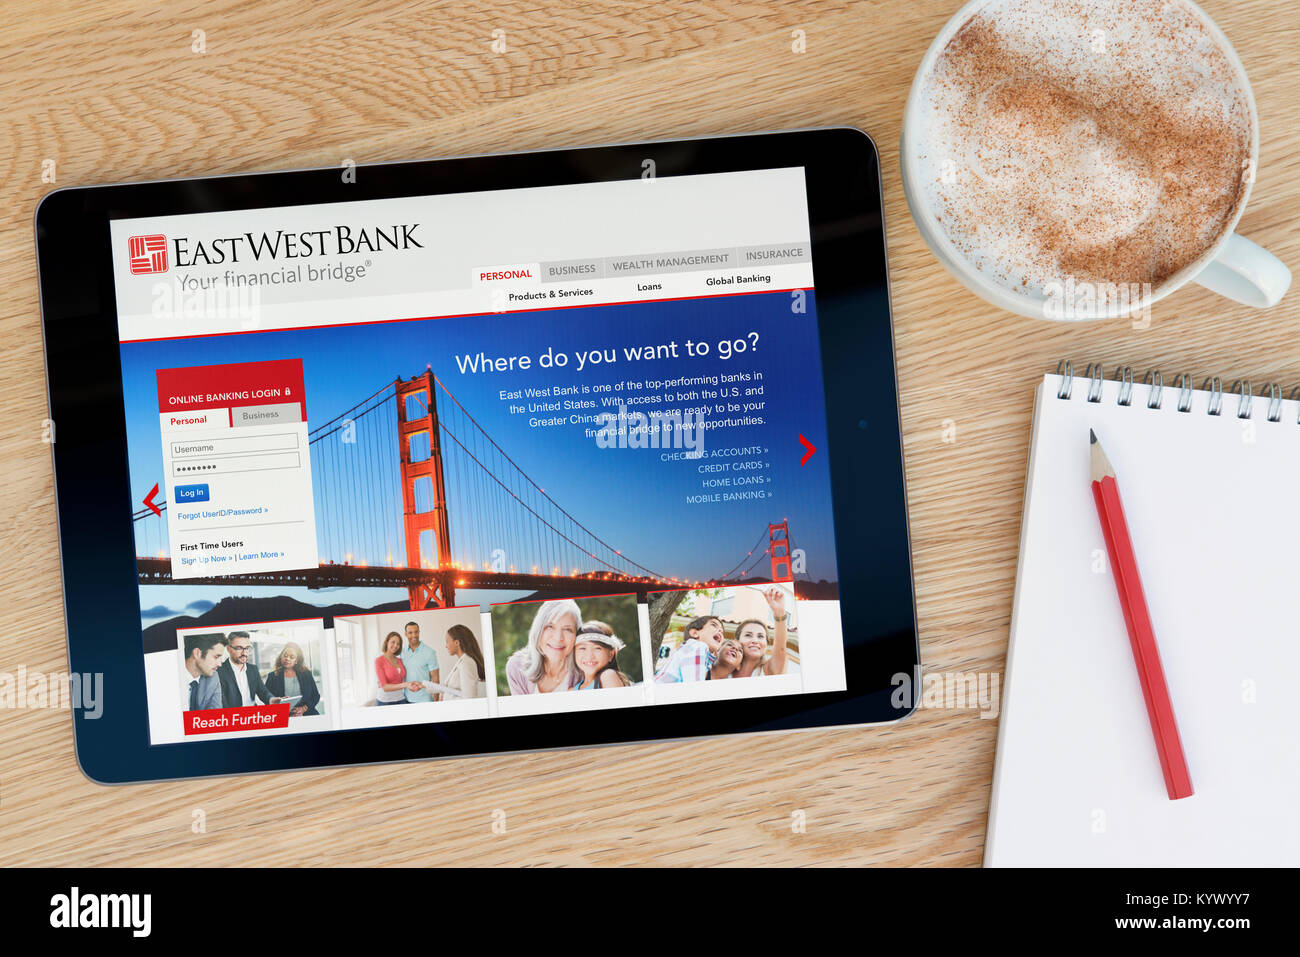 The East West Bank website on an iPad tablet, on a wooden table beside a notepad, pencil and cup of coffee (Editorial only) Stock Photo